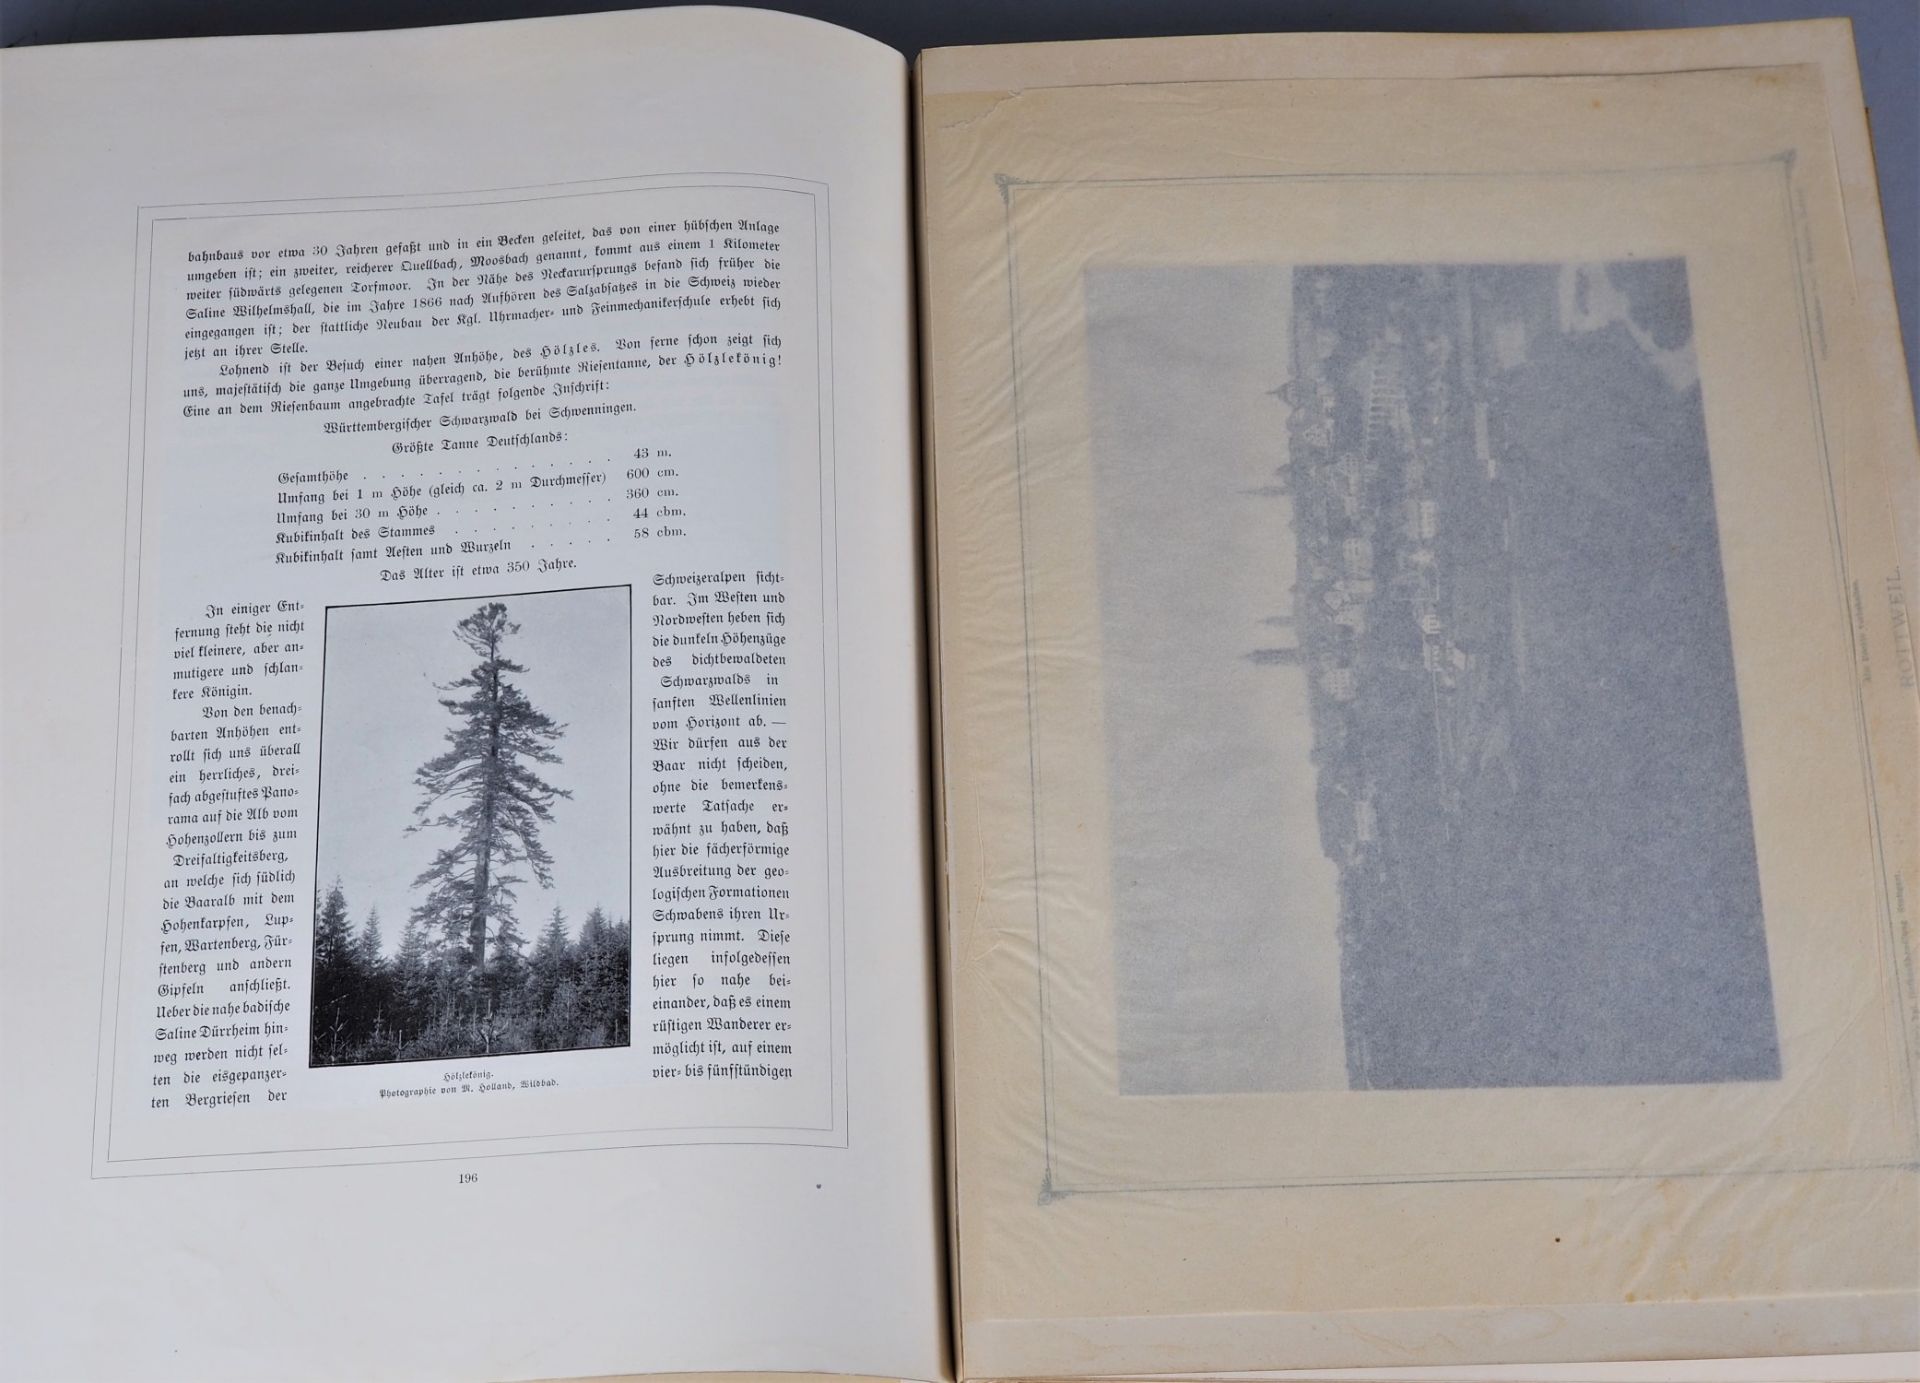 The Black Forest in words and pictures, 4th edition 1903 - Image 4 of 4